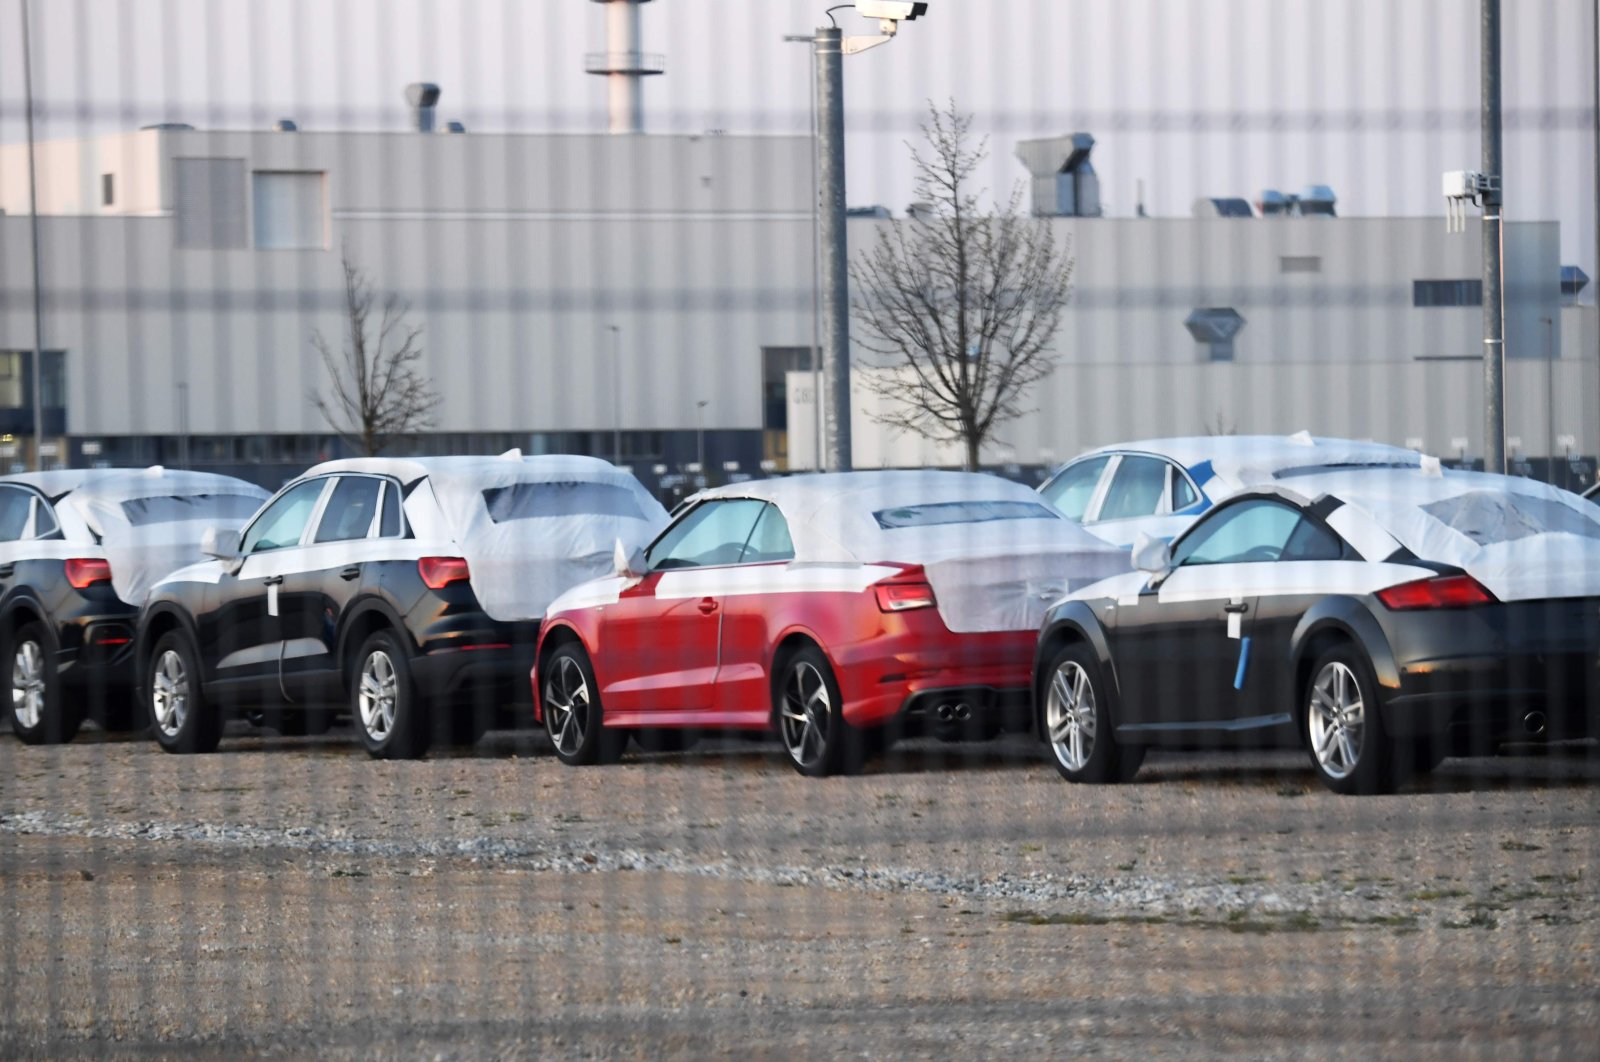 Cars lined up at the factory of German carmaker Audi in Gyor, Hungary, about 120 kilometers (75 miles) west of Budapest, following the Volkswagen Group's Audi brand restarting operations at its plant, April 15, 2020. (AFP Photo)